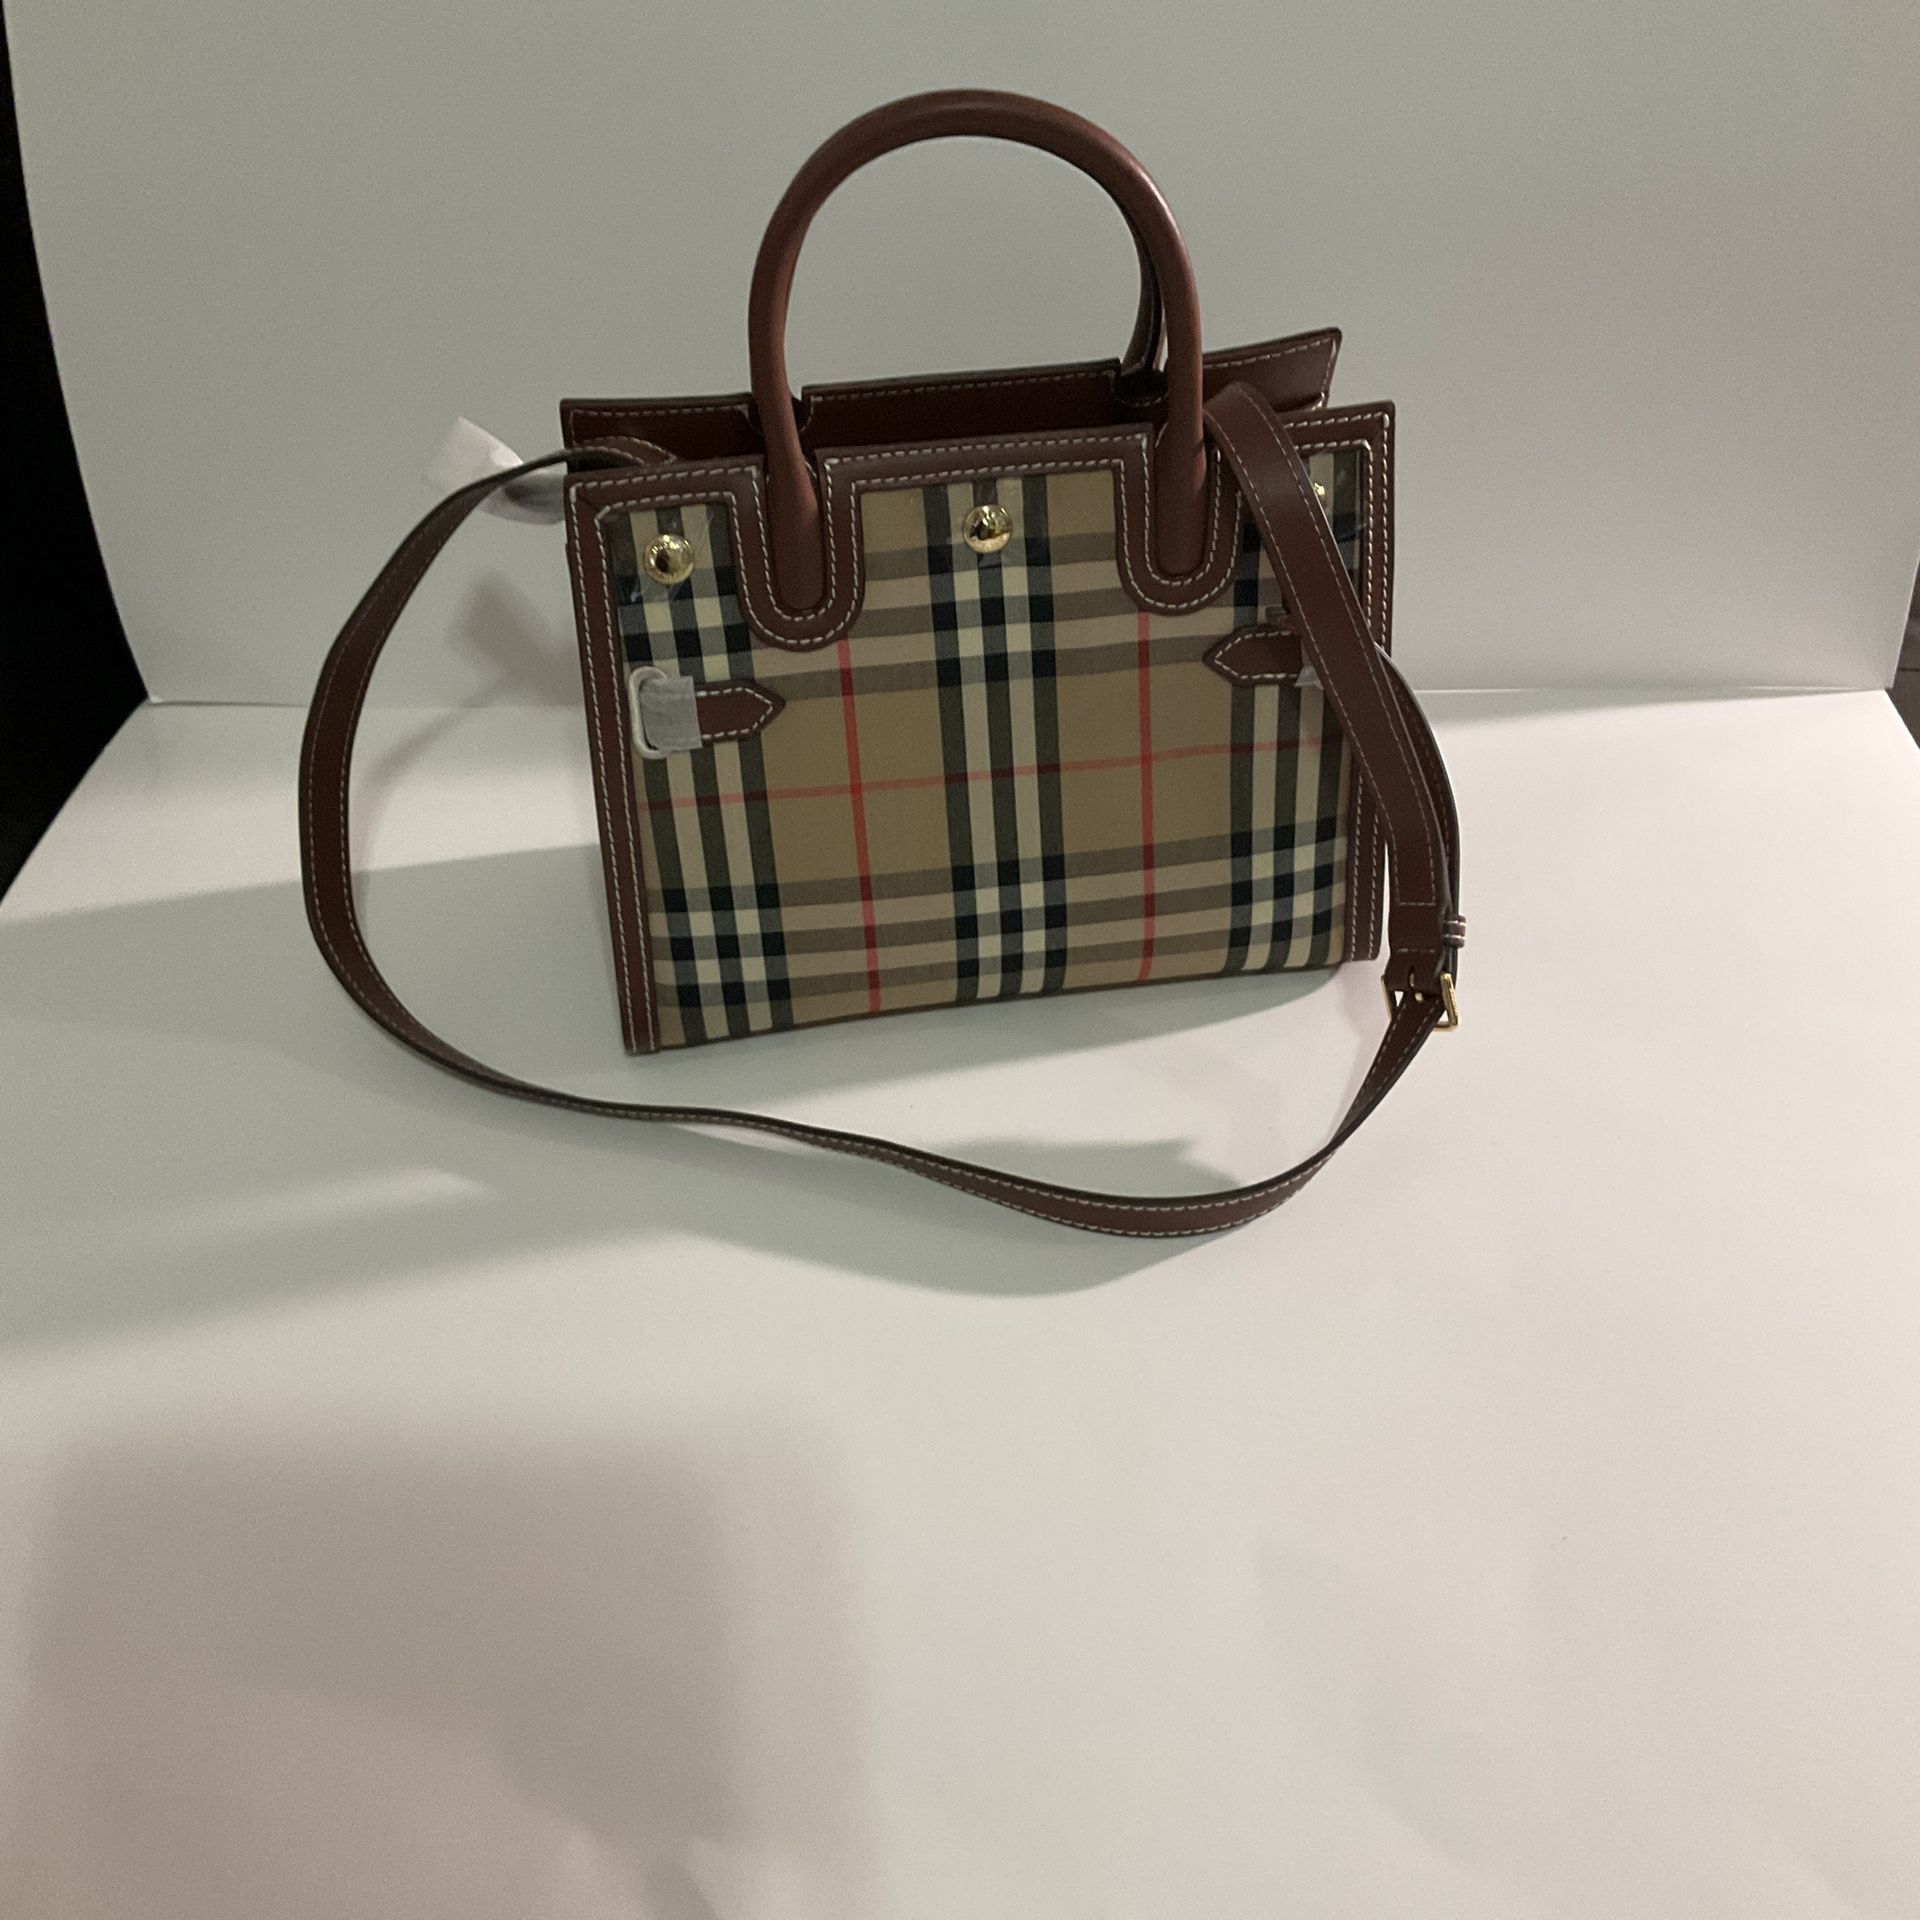 Burberry Banner Bag for Sale in Miami, FL - OfferUp